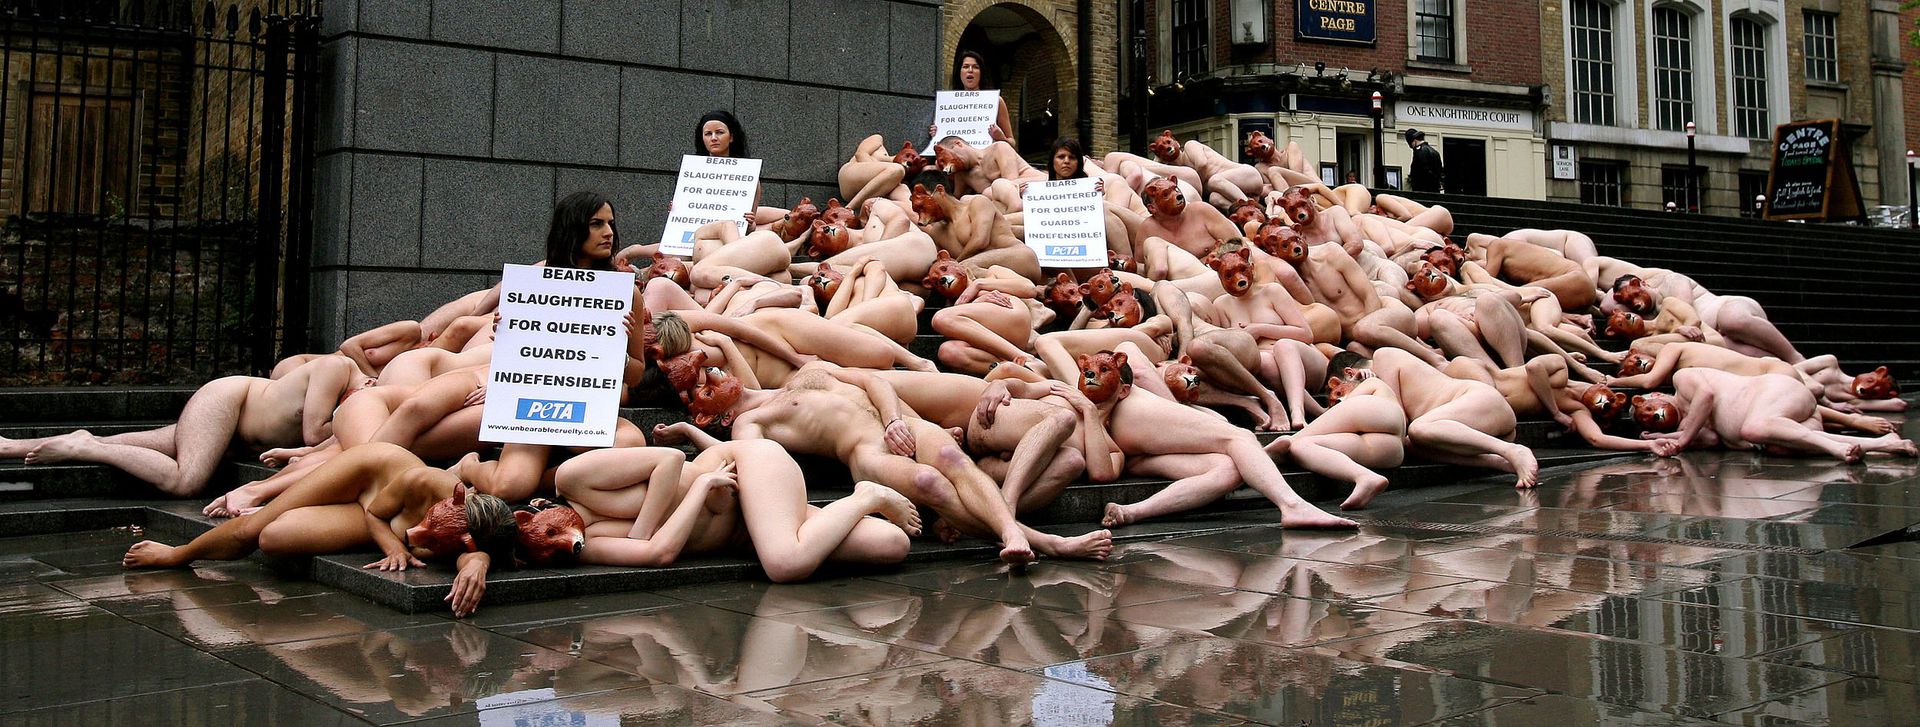 Naked bunny girl freezes tail off in olympic fur protest